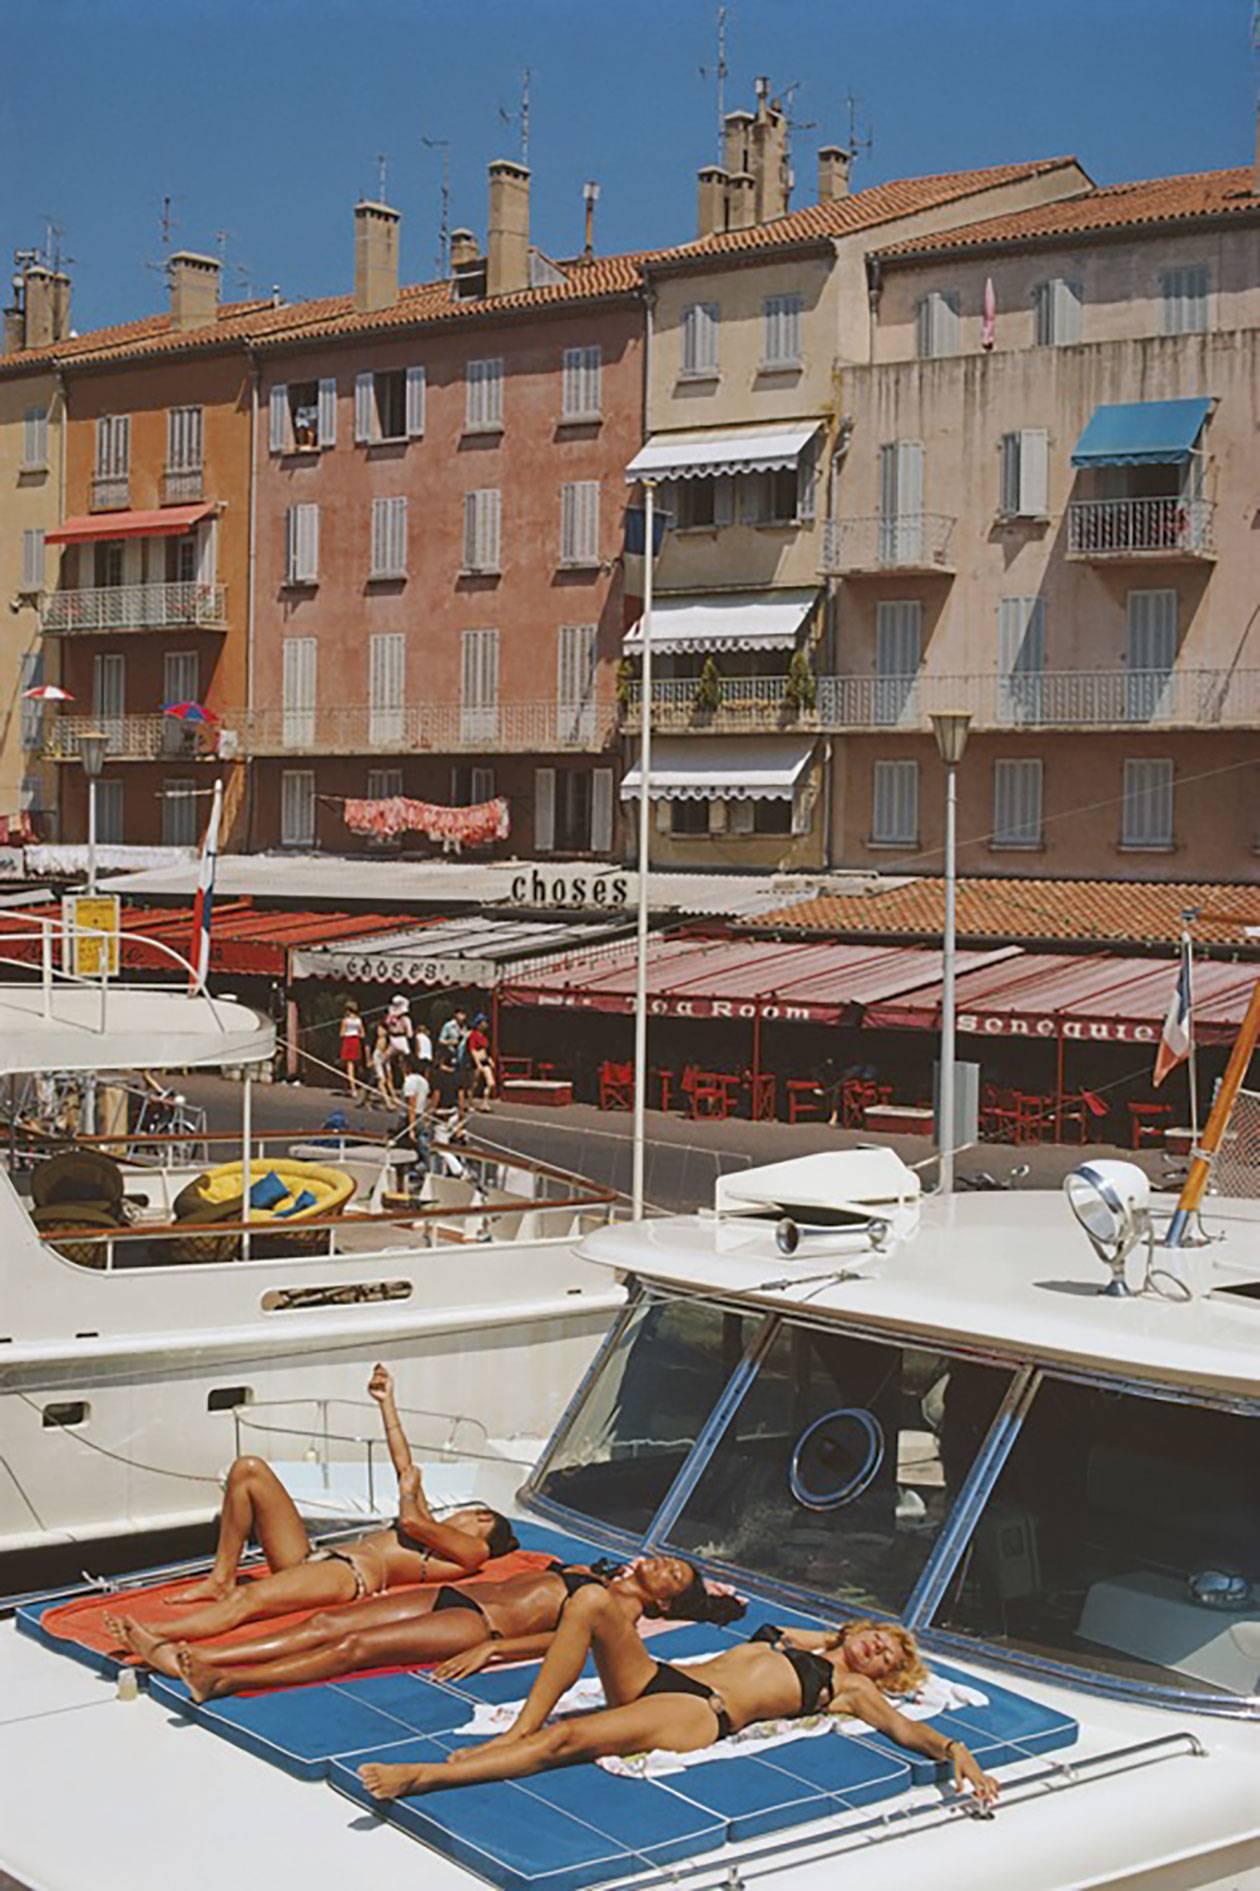 Saint-Tropez Sunbathers, 1971 
Chromogenic Lambda print
Estate stamped and hand numbered edition of 150 with certificate of authenticity from the estate.

Cars and pedestrians on the busy seafront at Saint-Tropez, in southeastern France, September